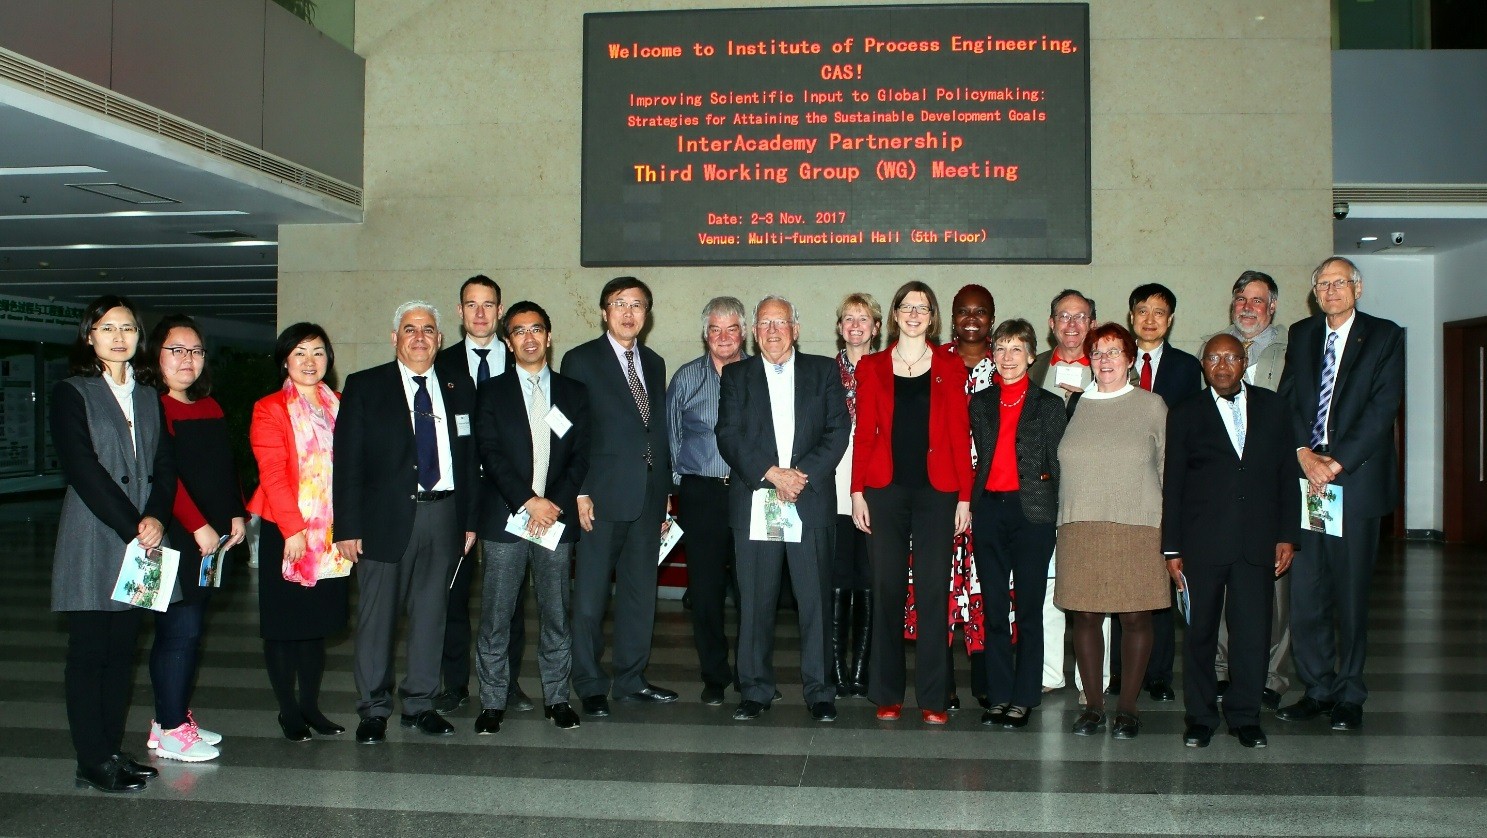 The Third Working Group (WG) Meeting on Improving Scientific Input to Global Policymaking: Strategies for Attaining the Sustainable Development Goals was Held in IPE